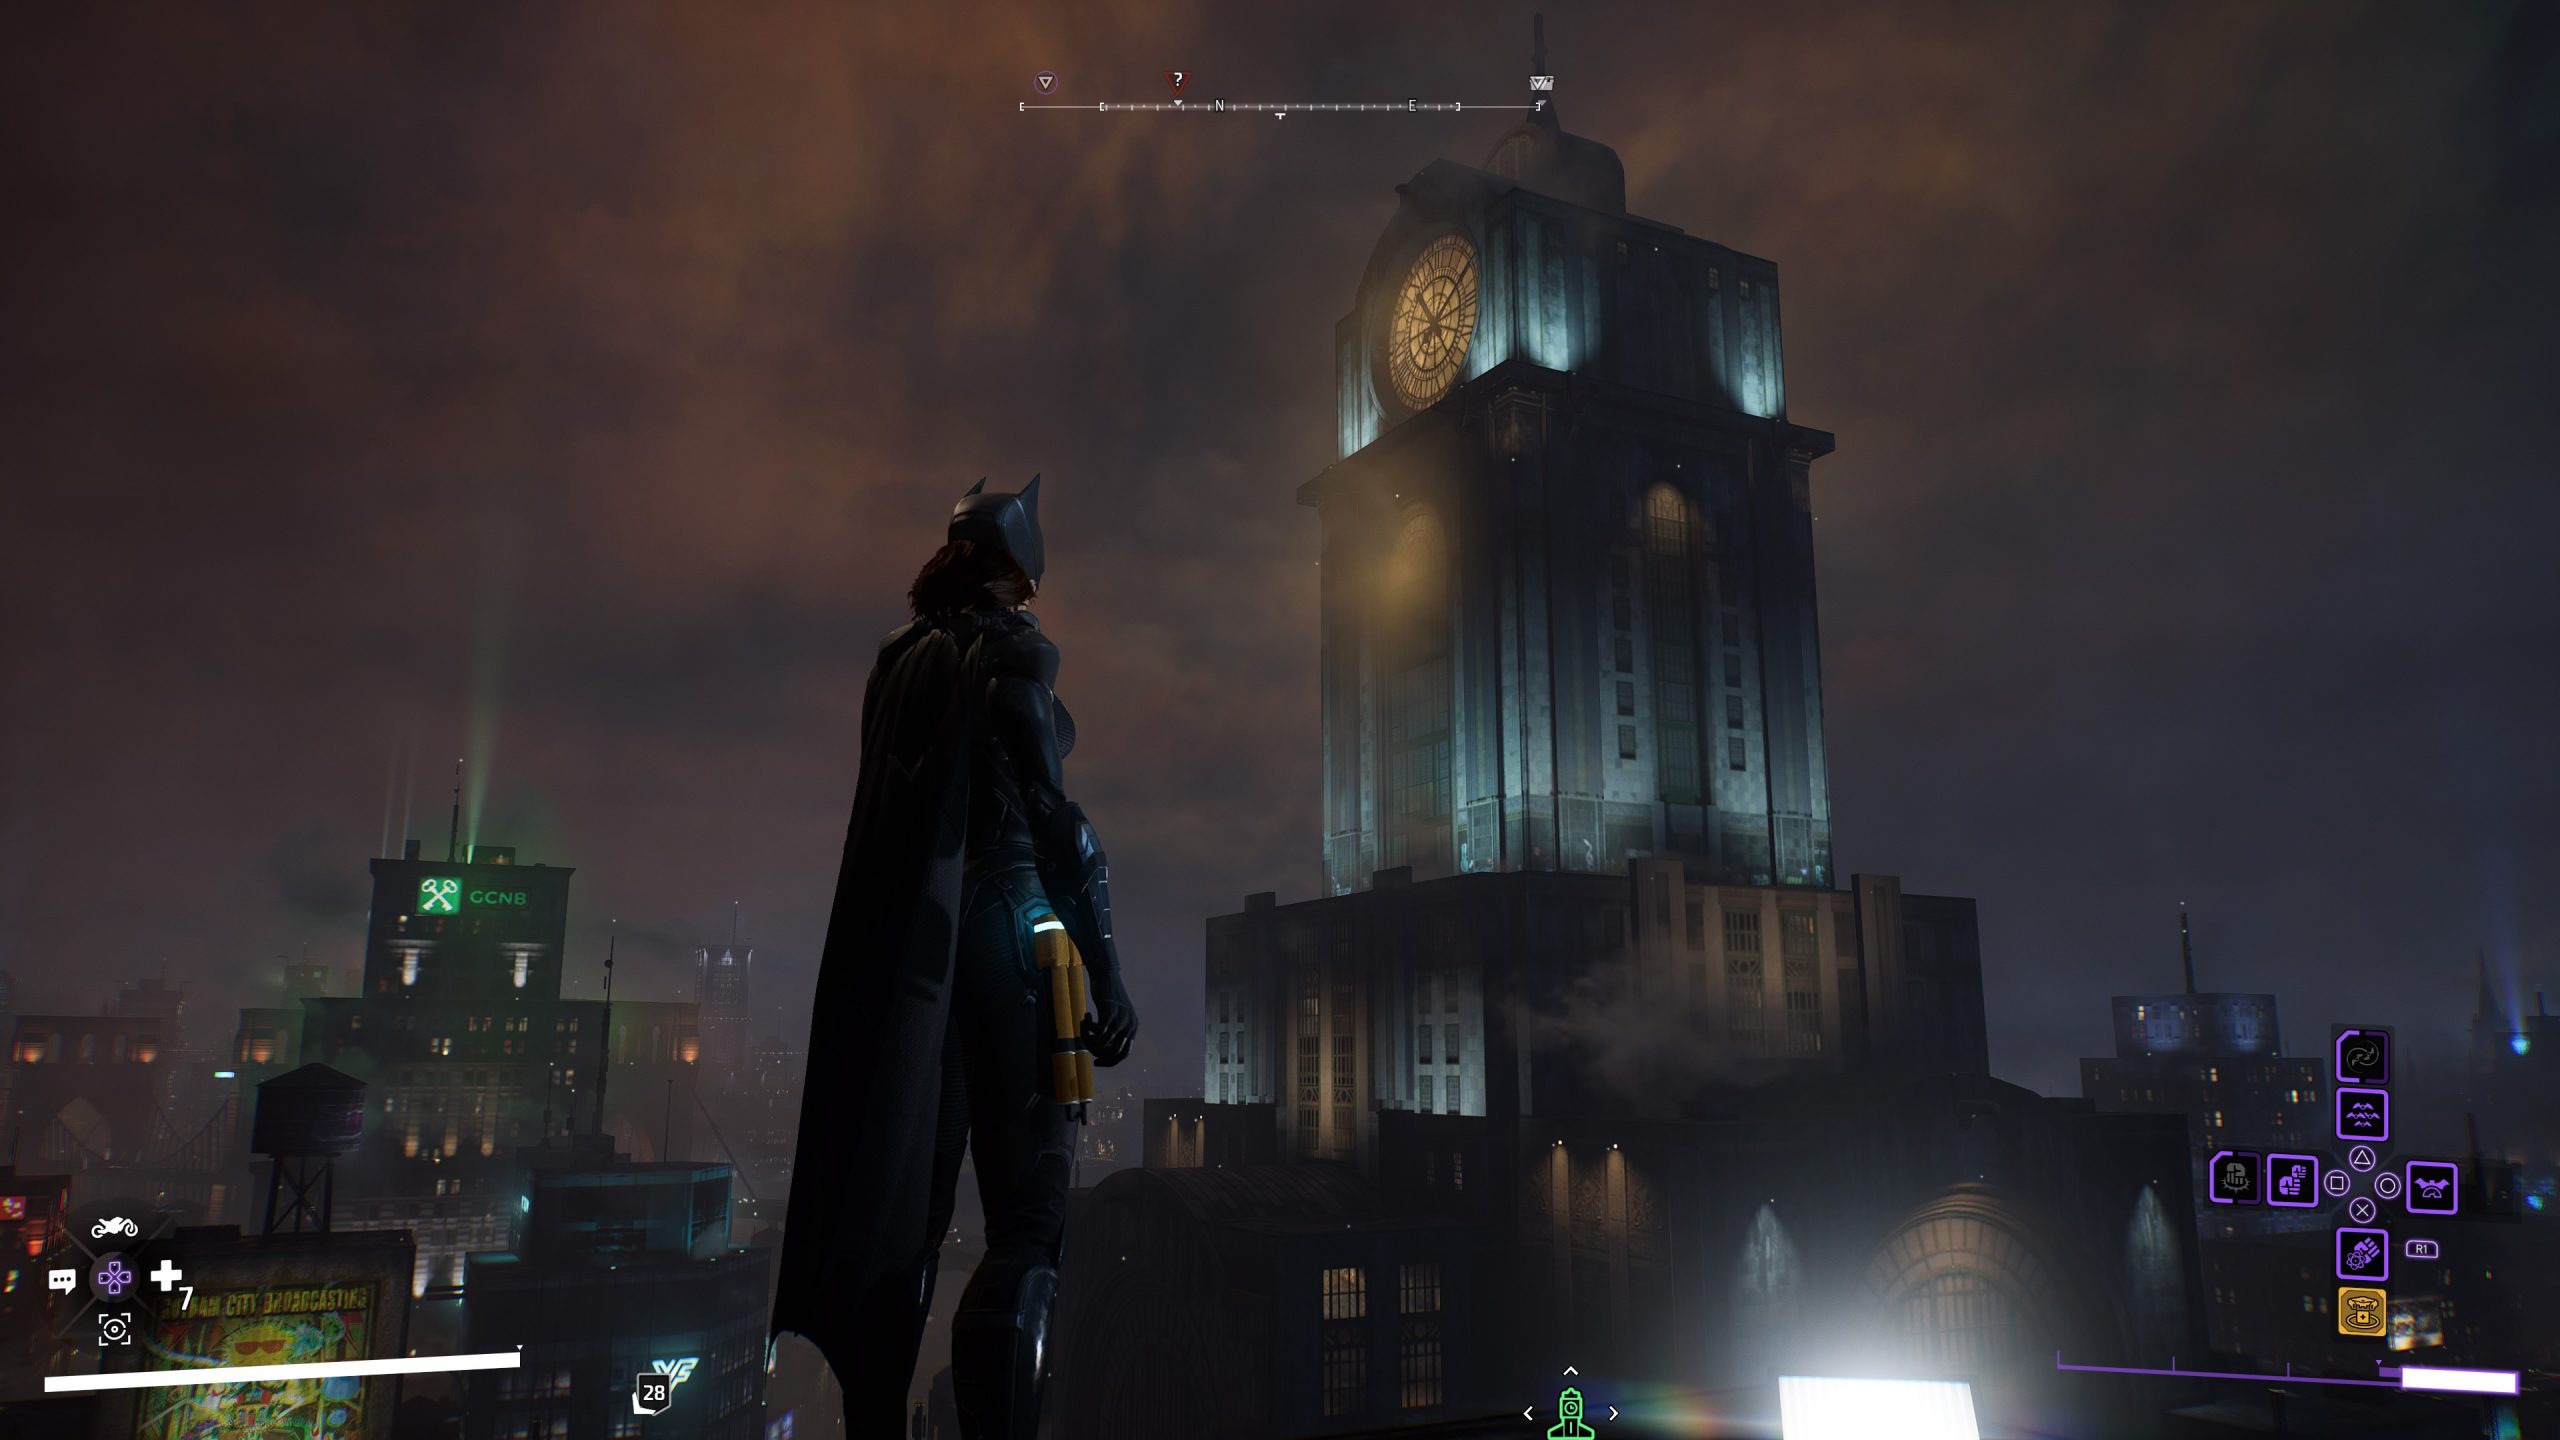 Gotham Knights pops up again with gameplay walkthrough - htxt